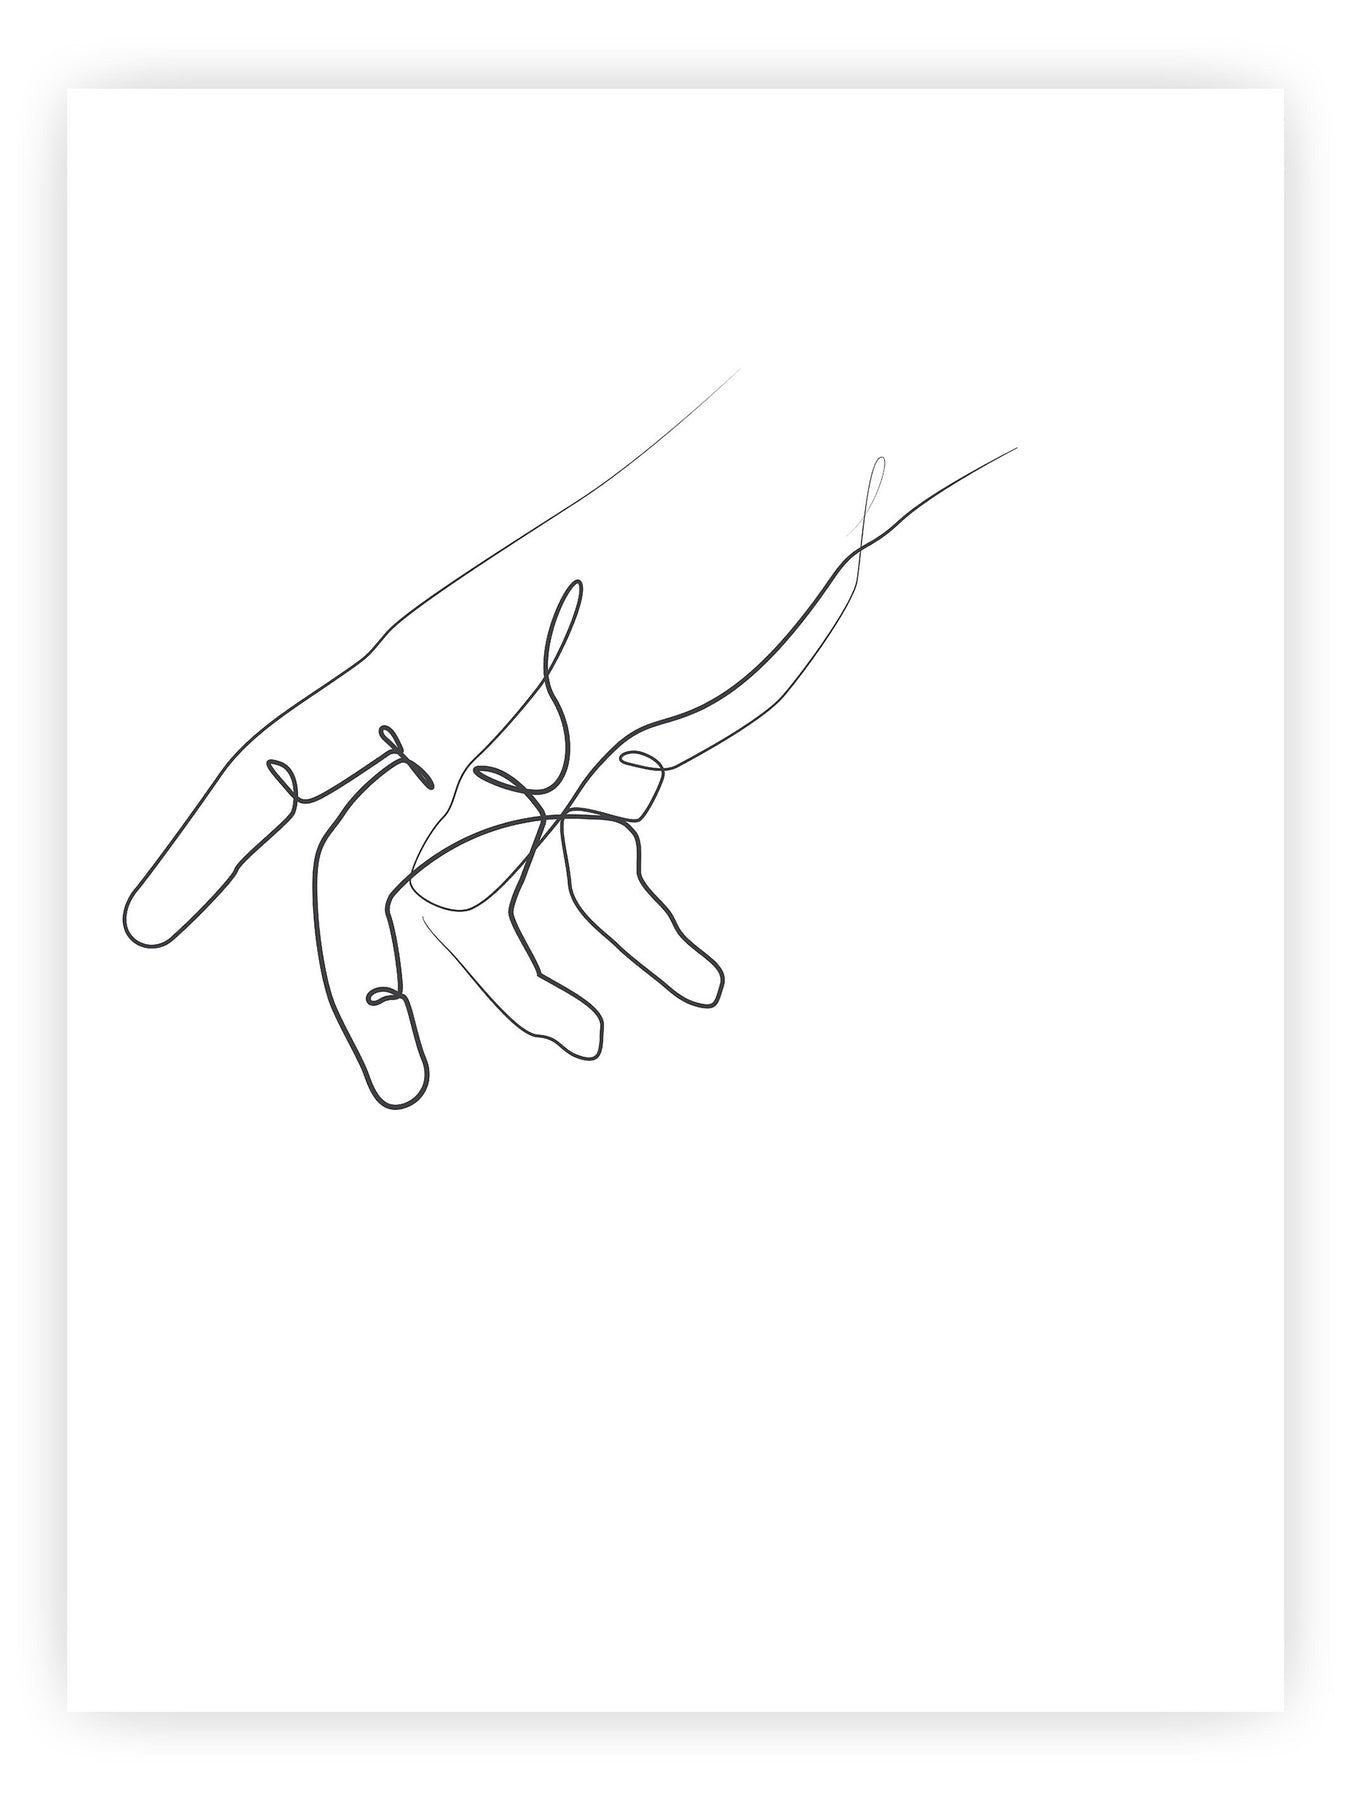 right hand drawing